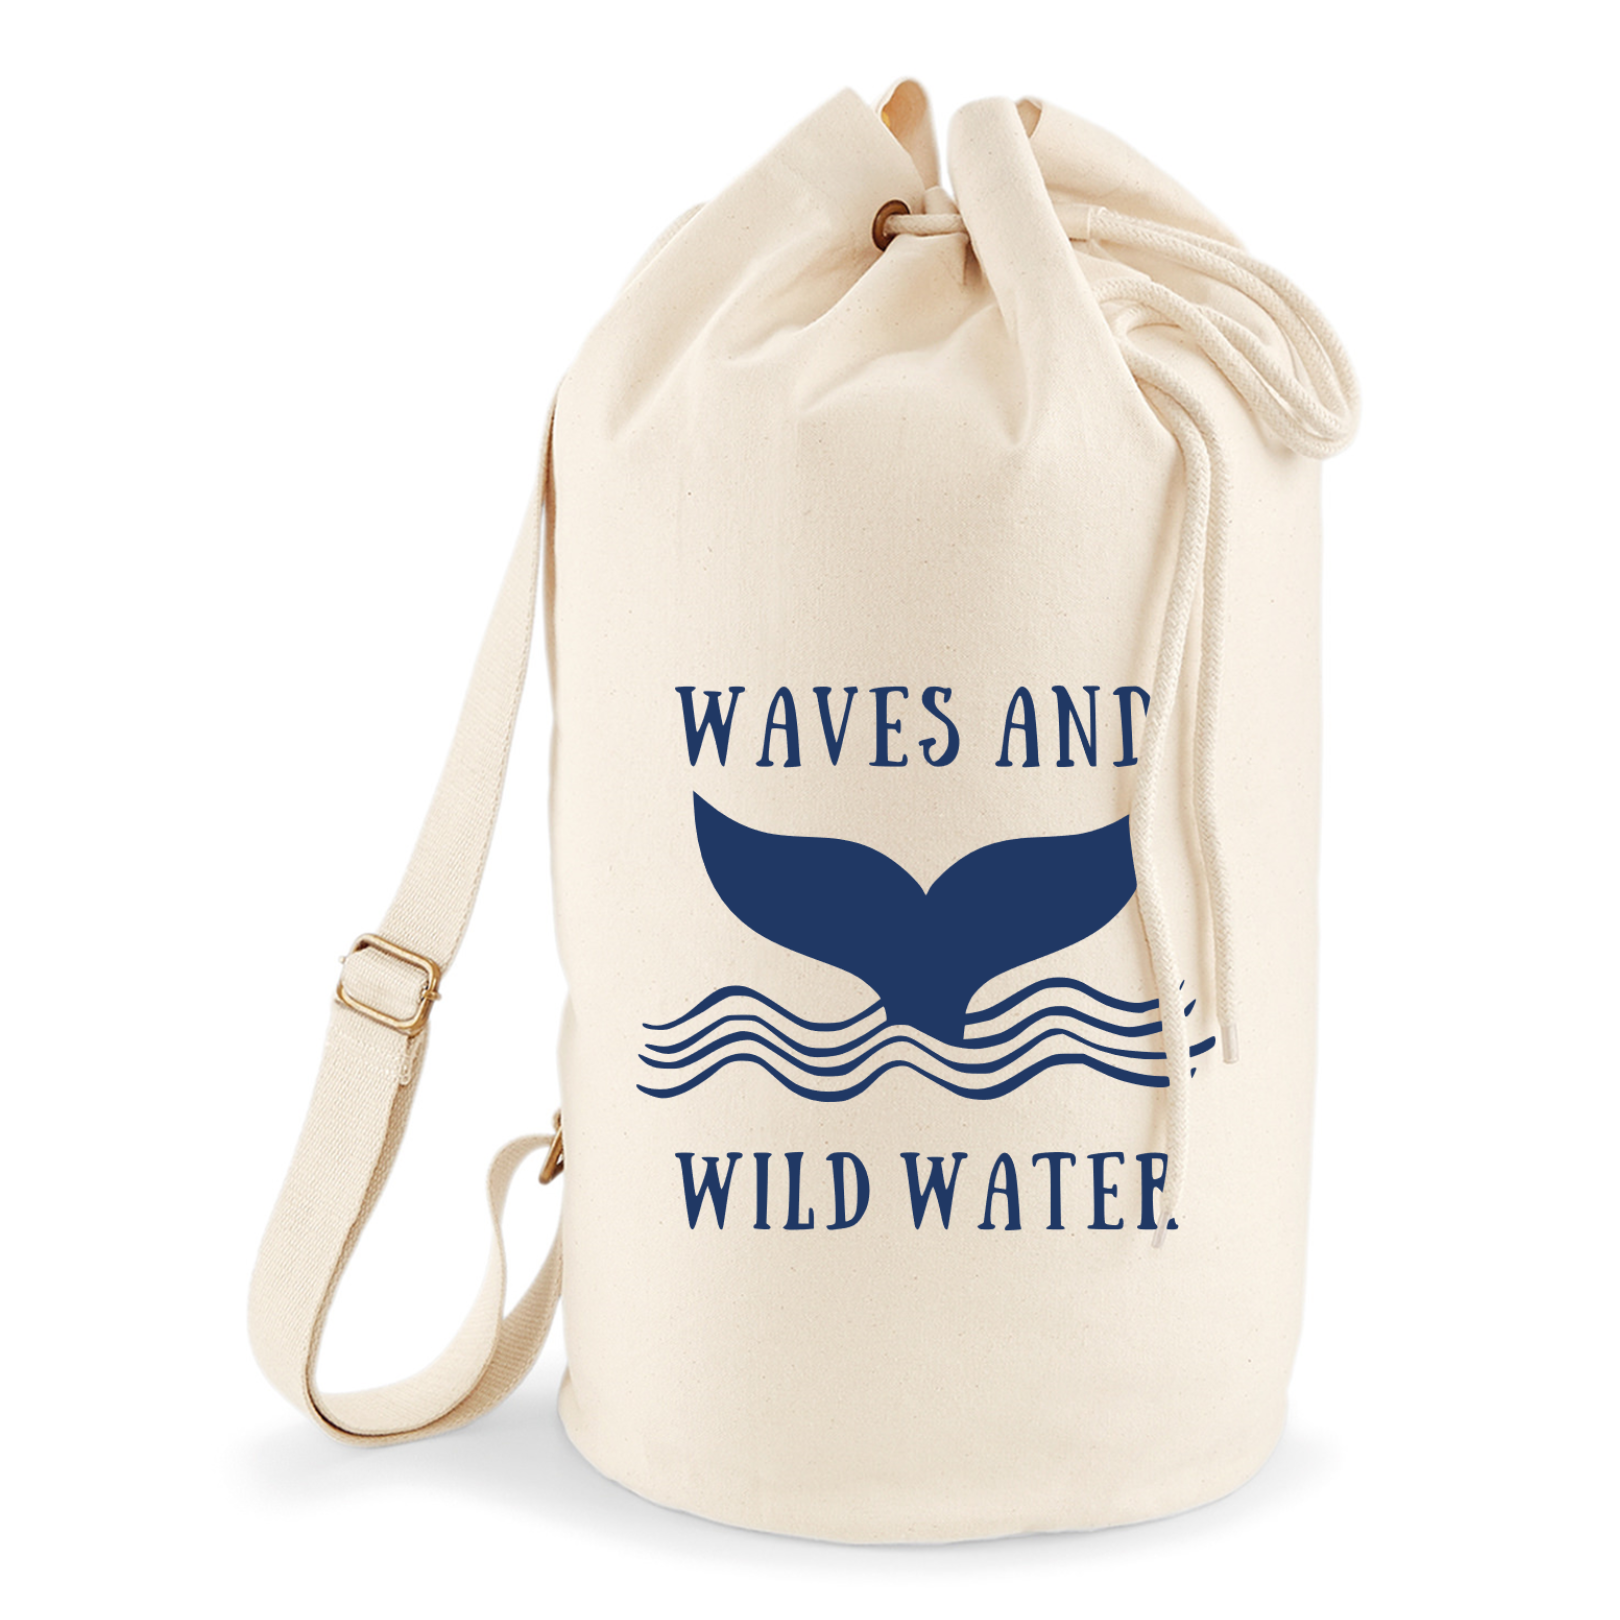 A cream sailor bag with a cream rope draw cord and webbing strap. The Waves & Wild Water logo is on the front in blue.